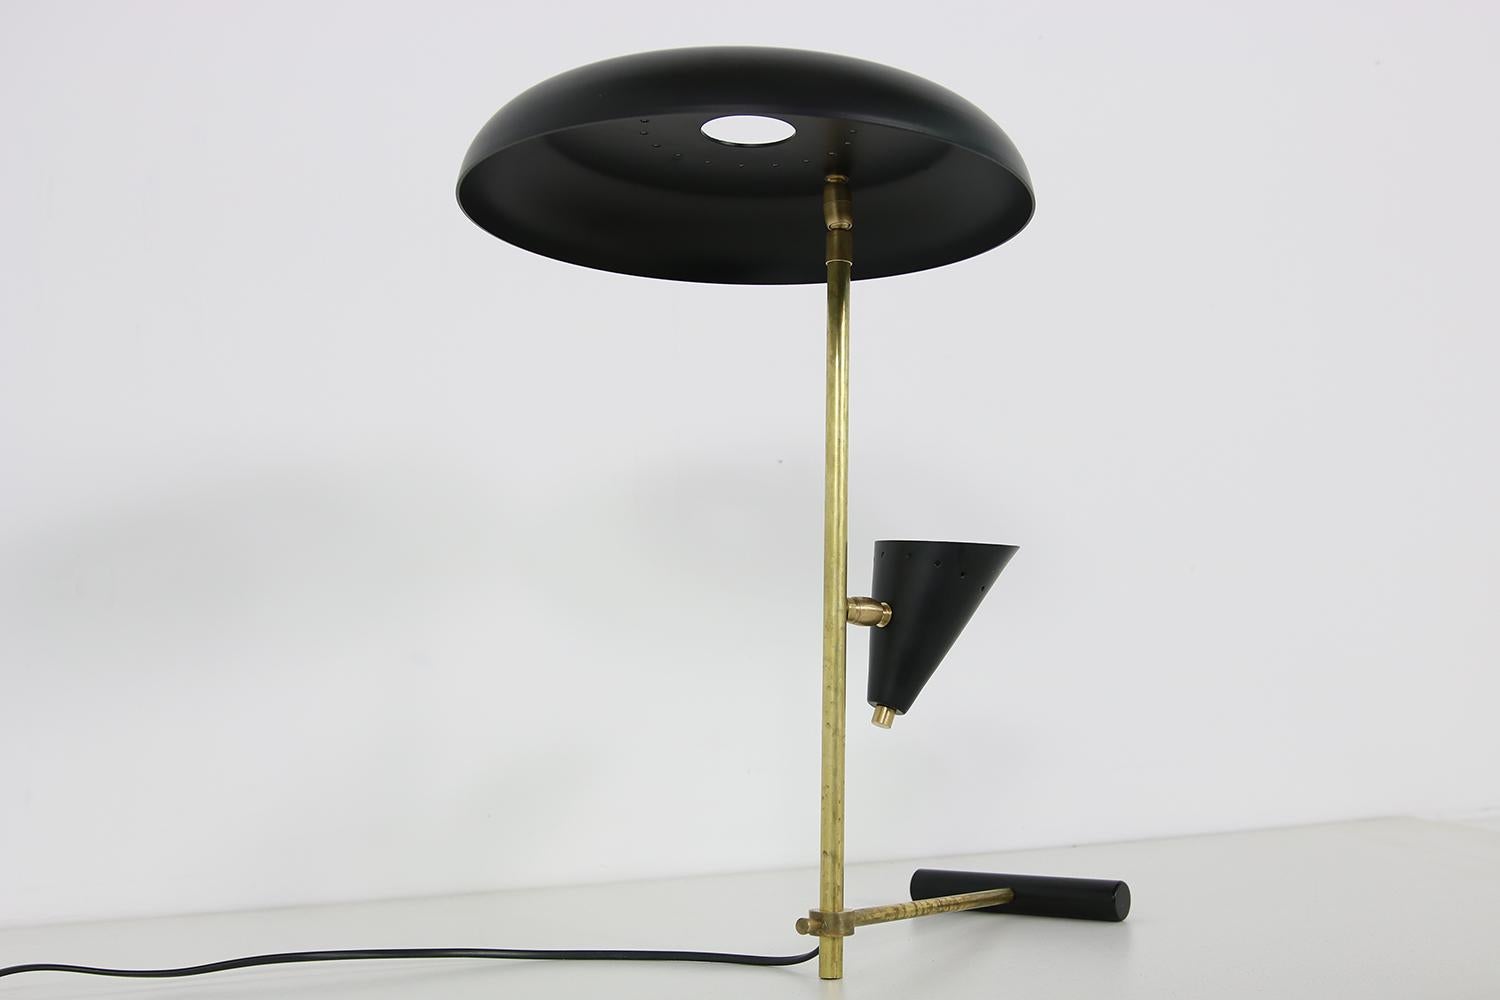 Metal Italian Modern Table Lamp Black & Brass with Adjustable Lampshade Stilnovo Style For Sale